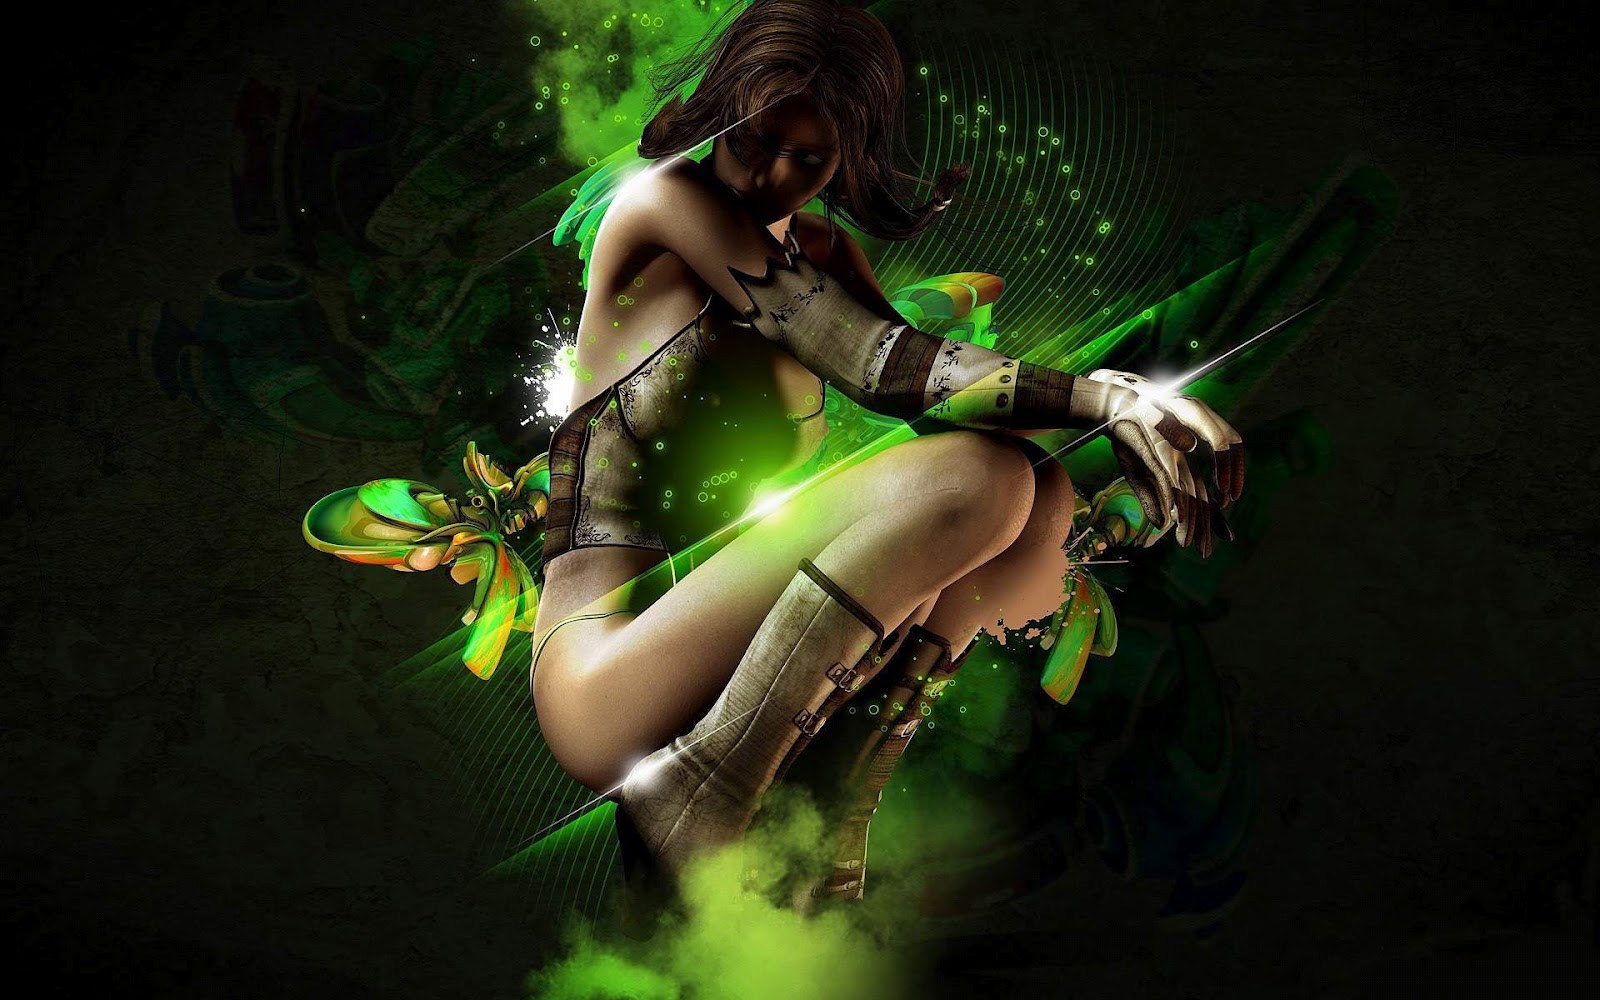 creative hd wallpapers for mobile,green,cg artwork,fictional character,graphic design,illustration